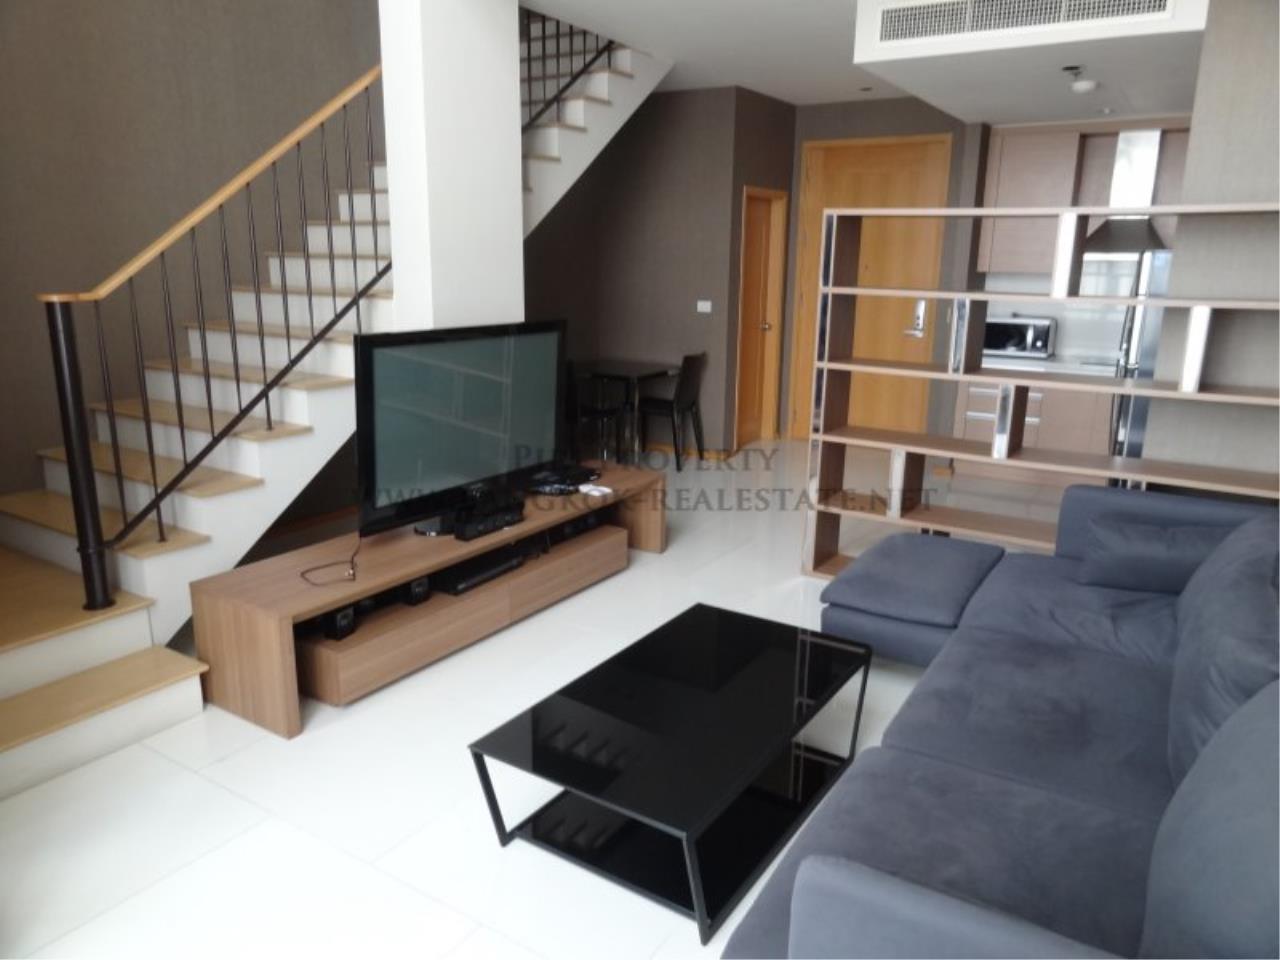 Piri Property Agency's Minimalistic Style - Emporio Duplex Condo for Rent - 1 Bedroom with nice view 1